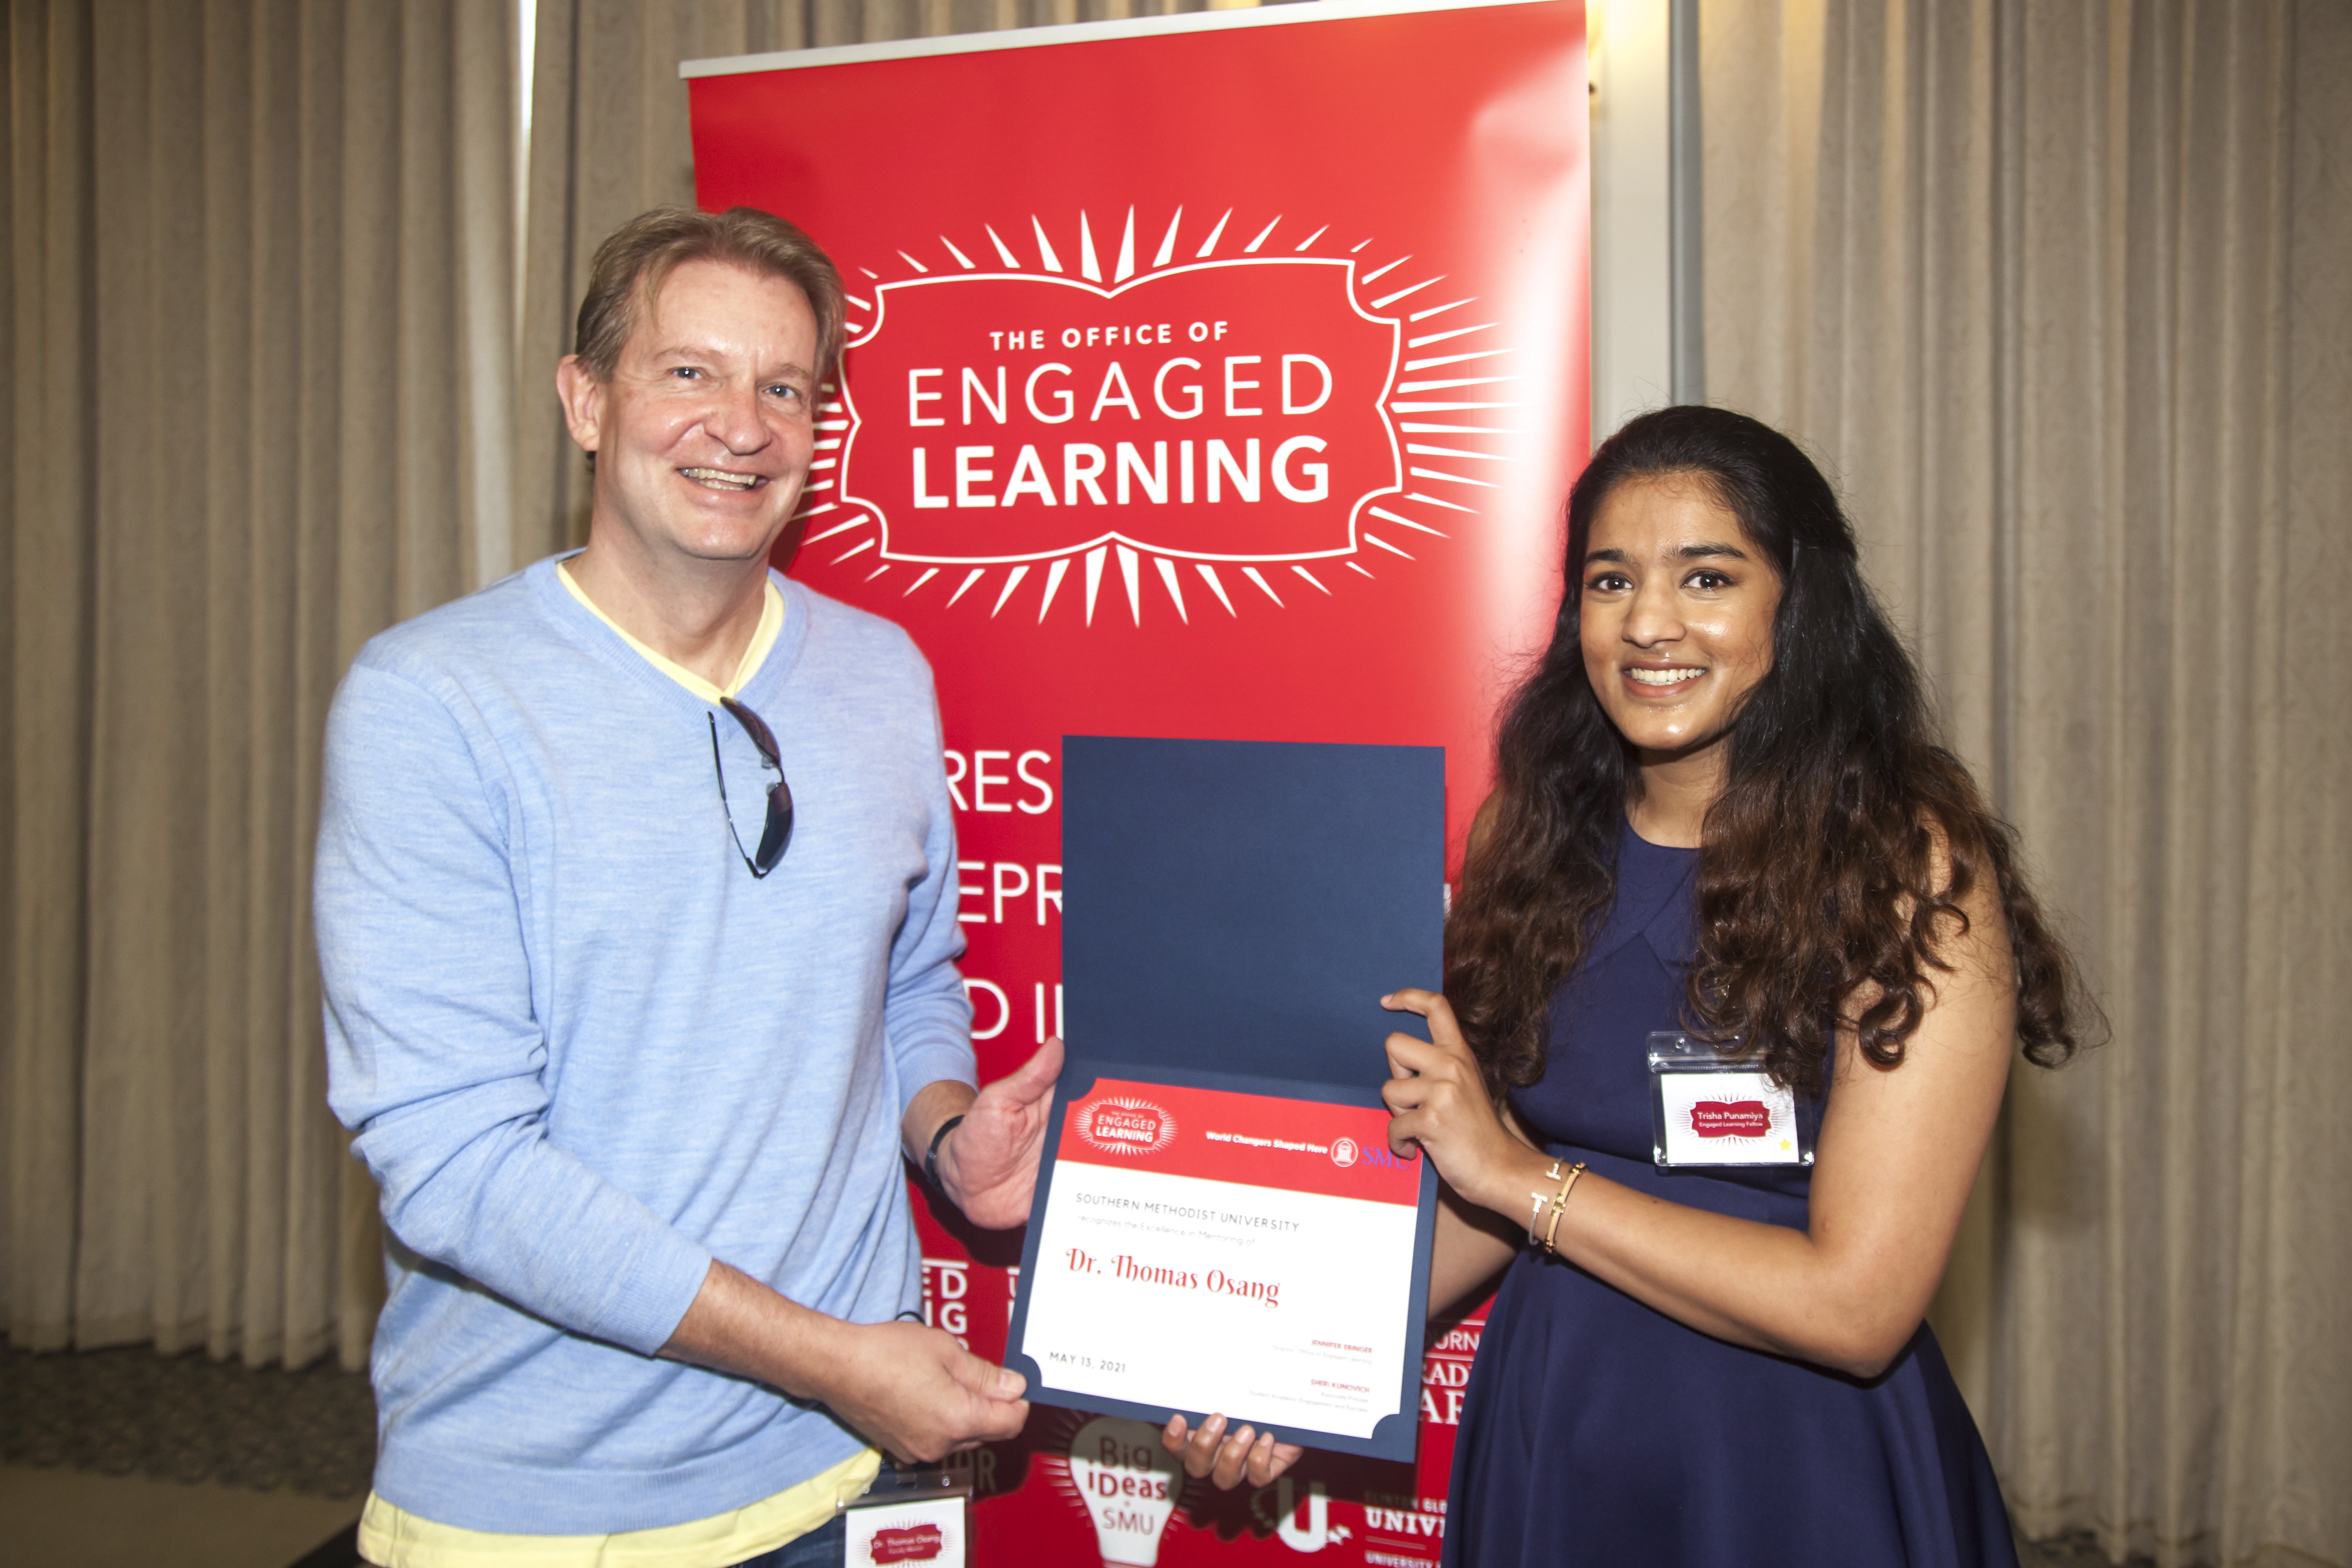 Professor Thomas Osang, left, with mentee Trisha Punayima, right. Showing his excellence in mentoring award at the Engaged Learning luncheon.